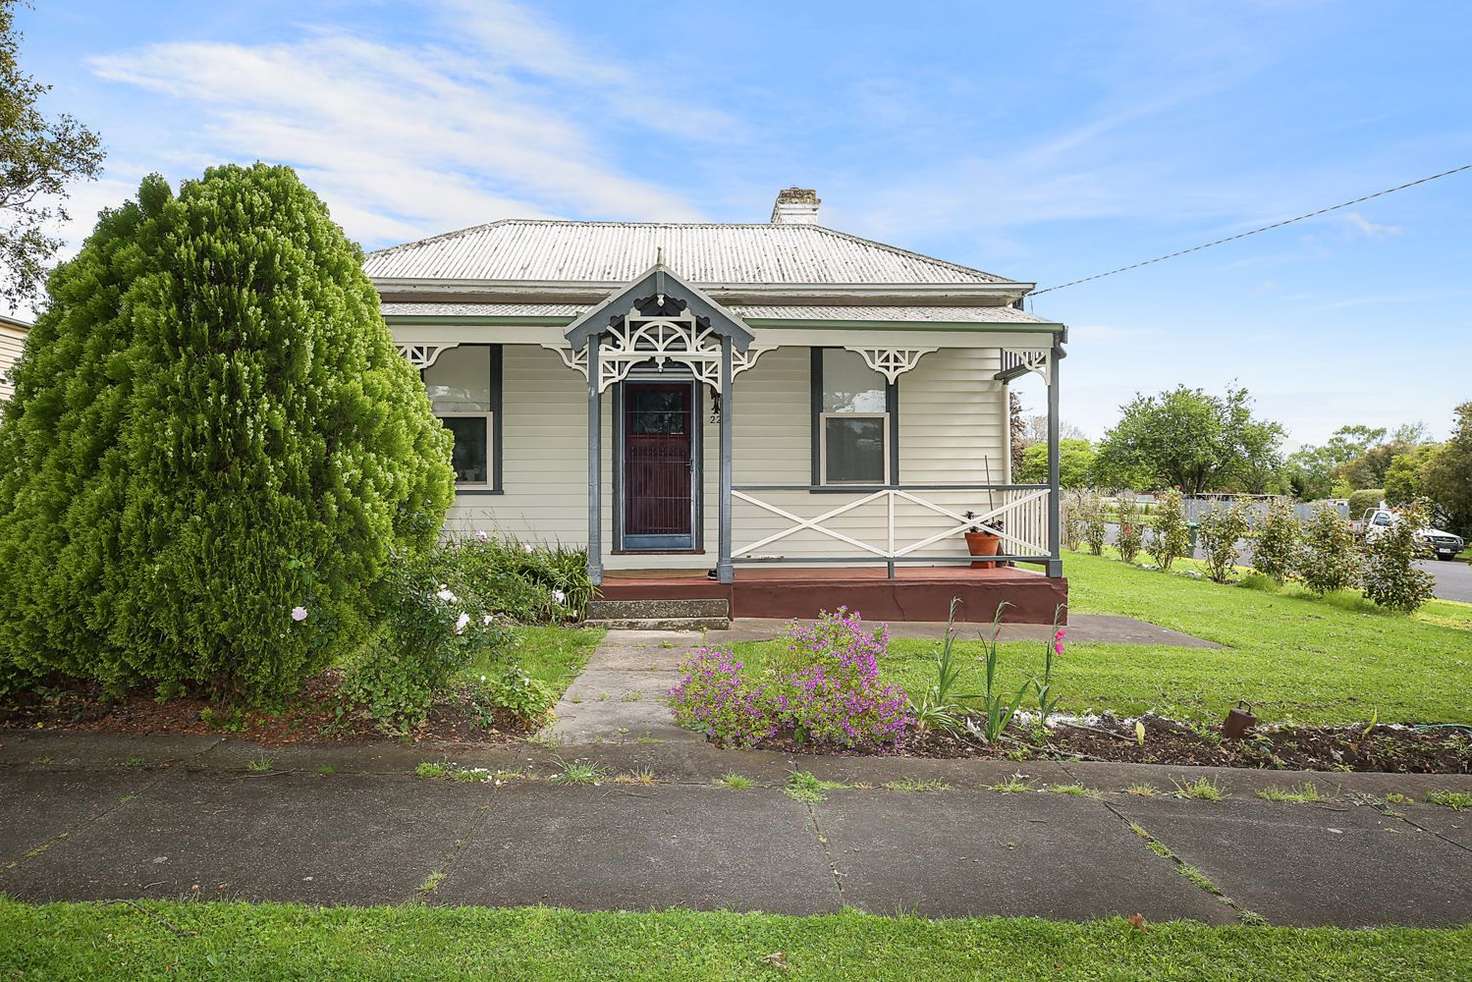 Main view of Homely house listing, 22 Brooke Street, Camperdown VIC 3260